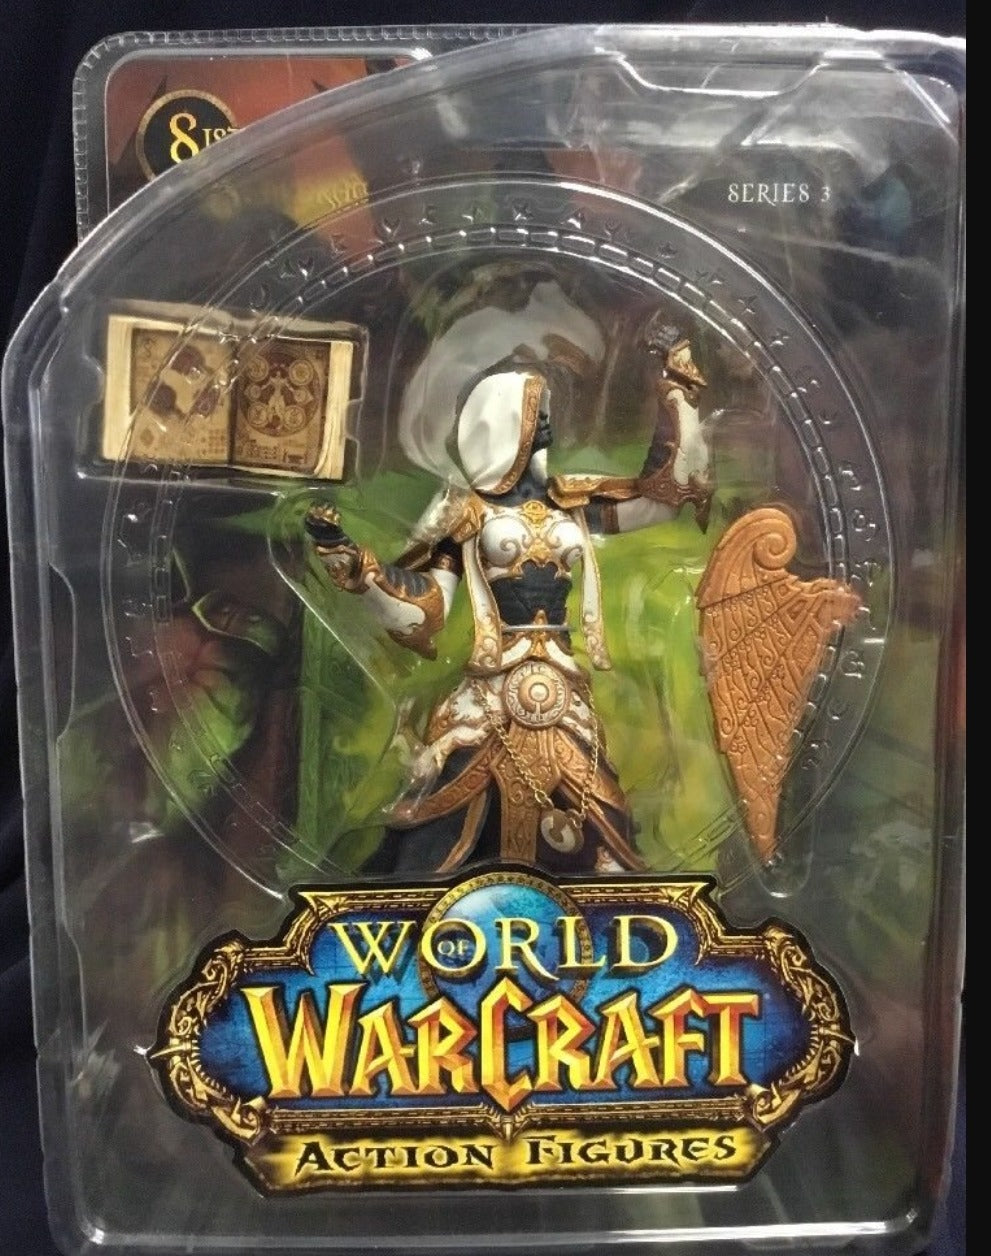 World of Warcraft Series 3 Sister Benedron Action Figure